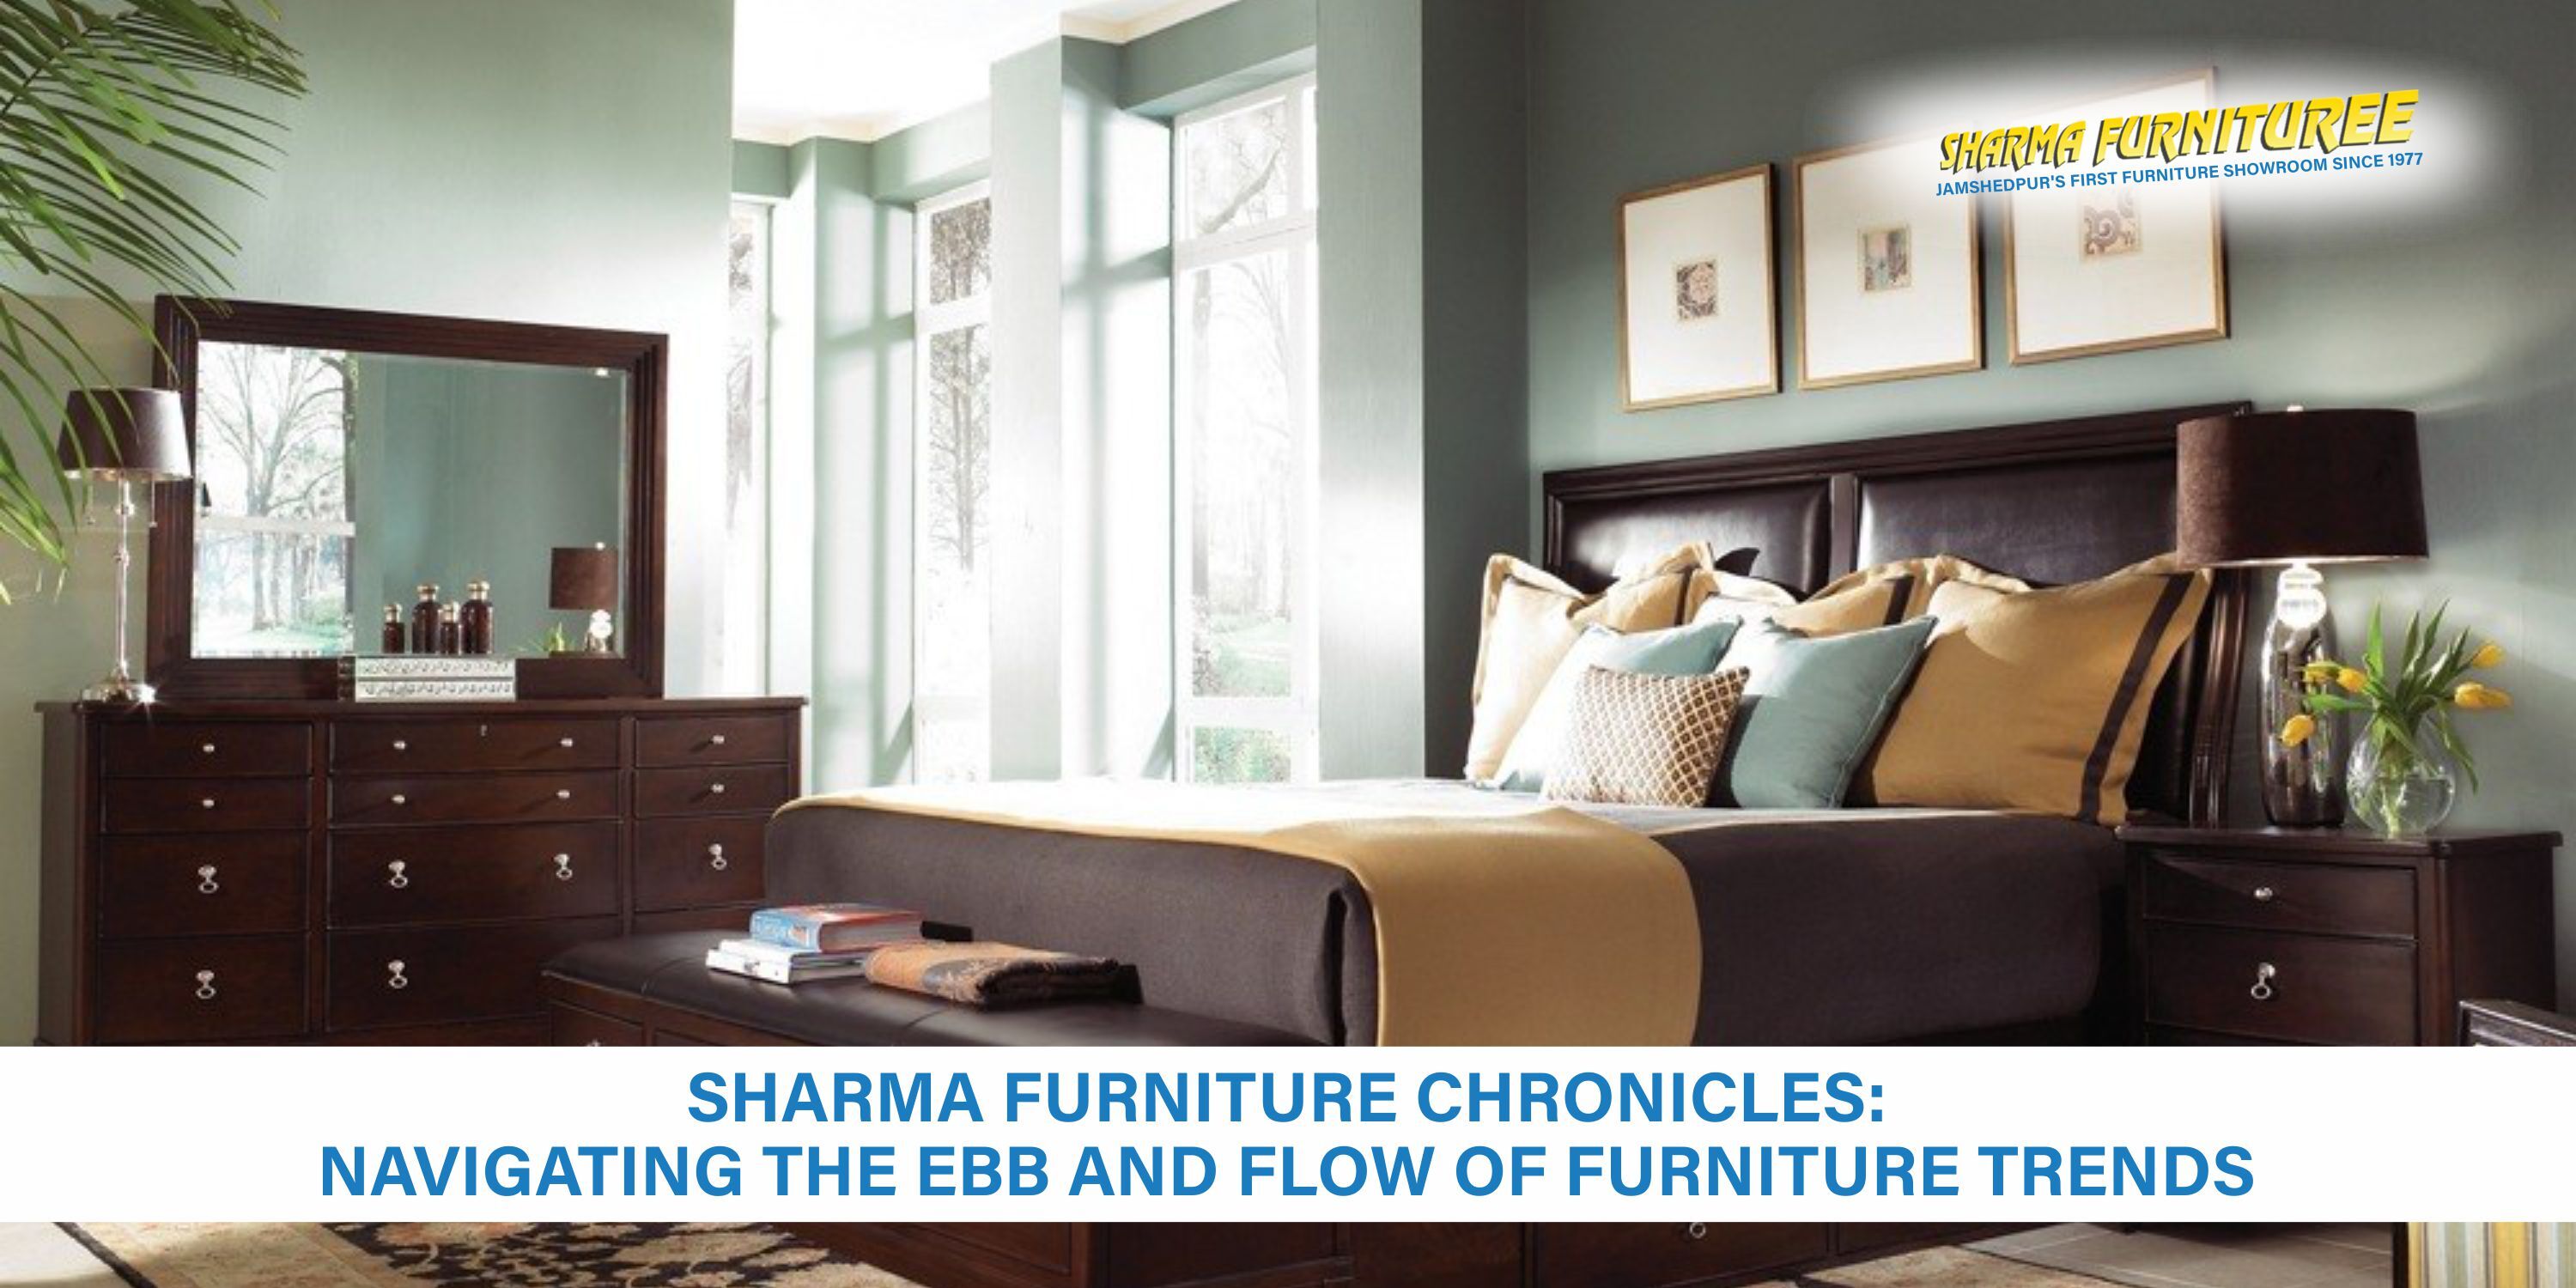 Sharma Furniture Chronicles: Navigating the Ebb and Flow of Furniture Trends